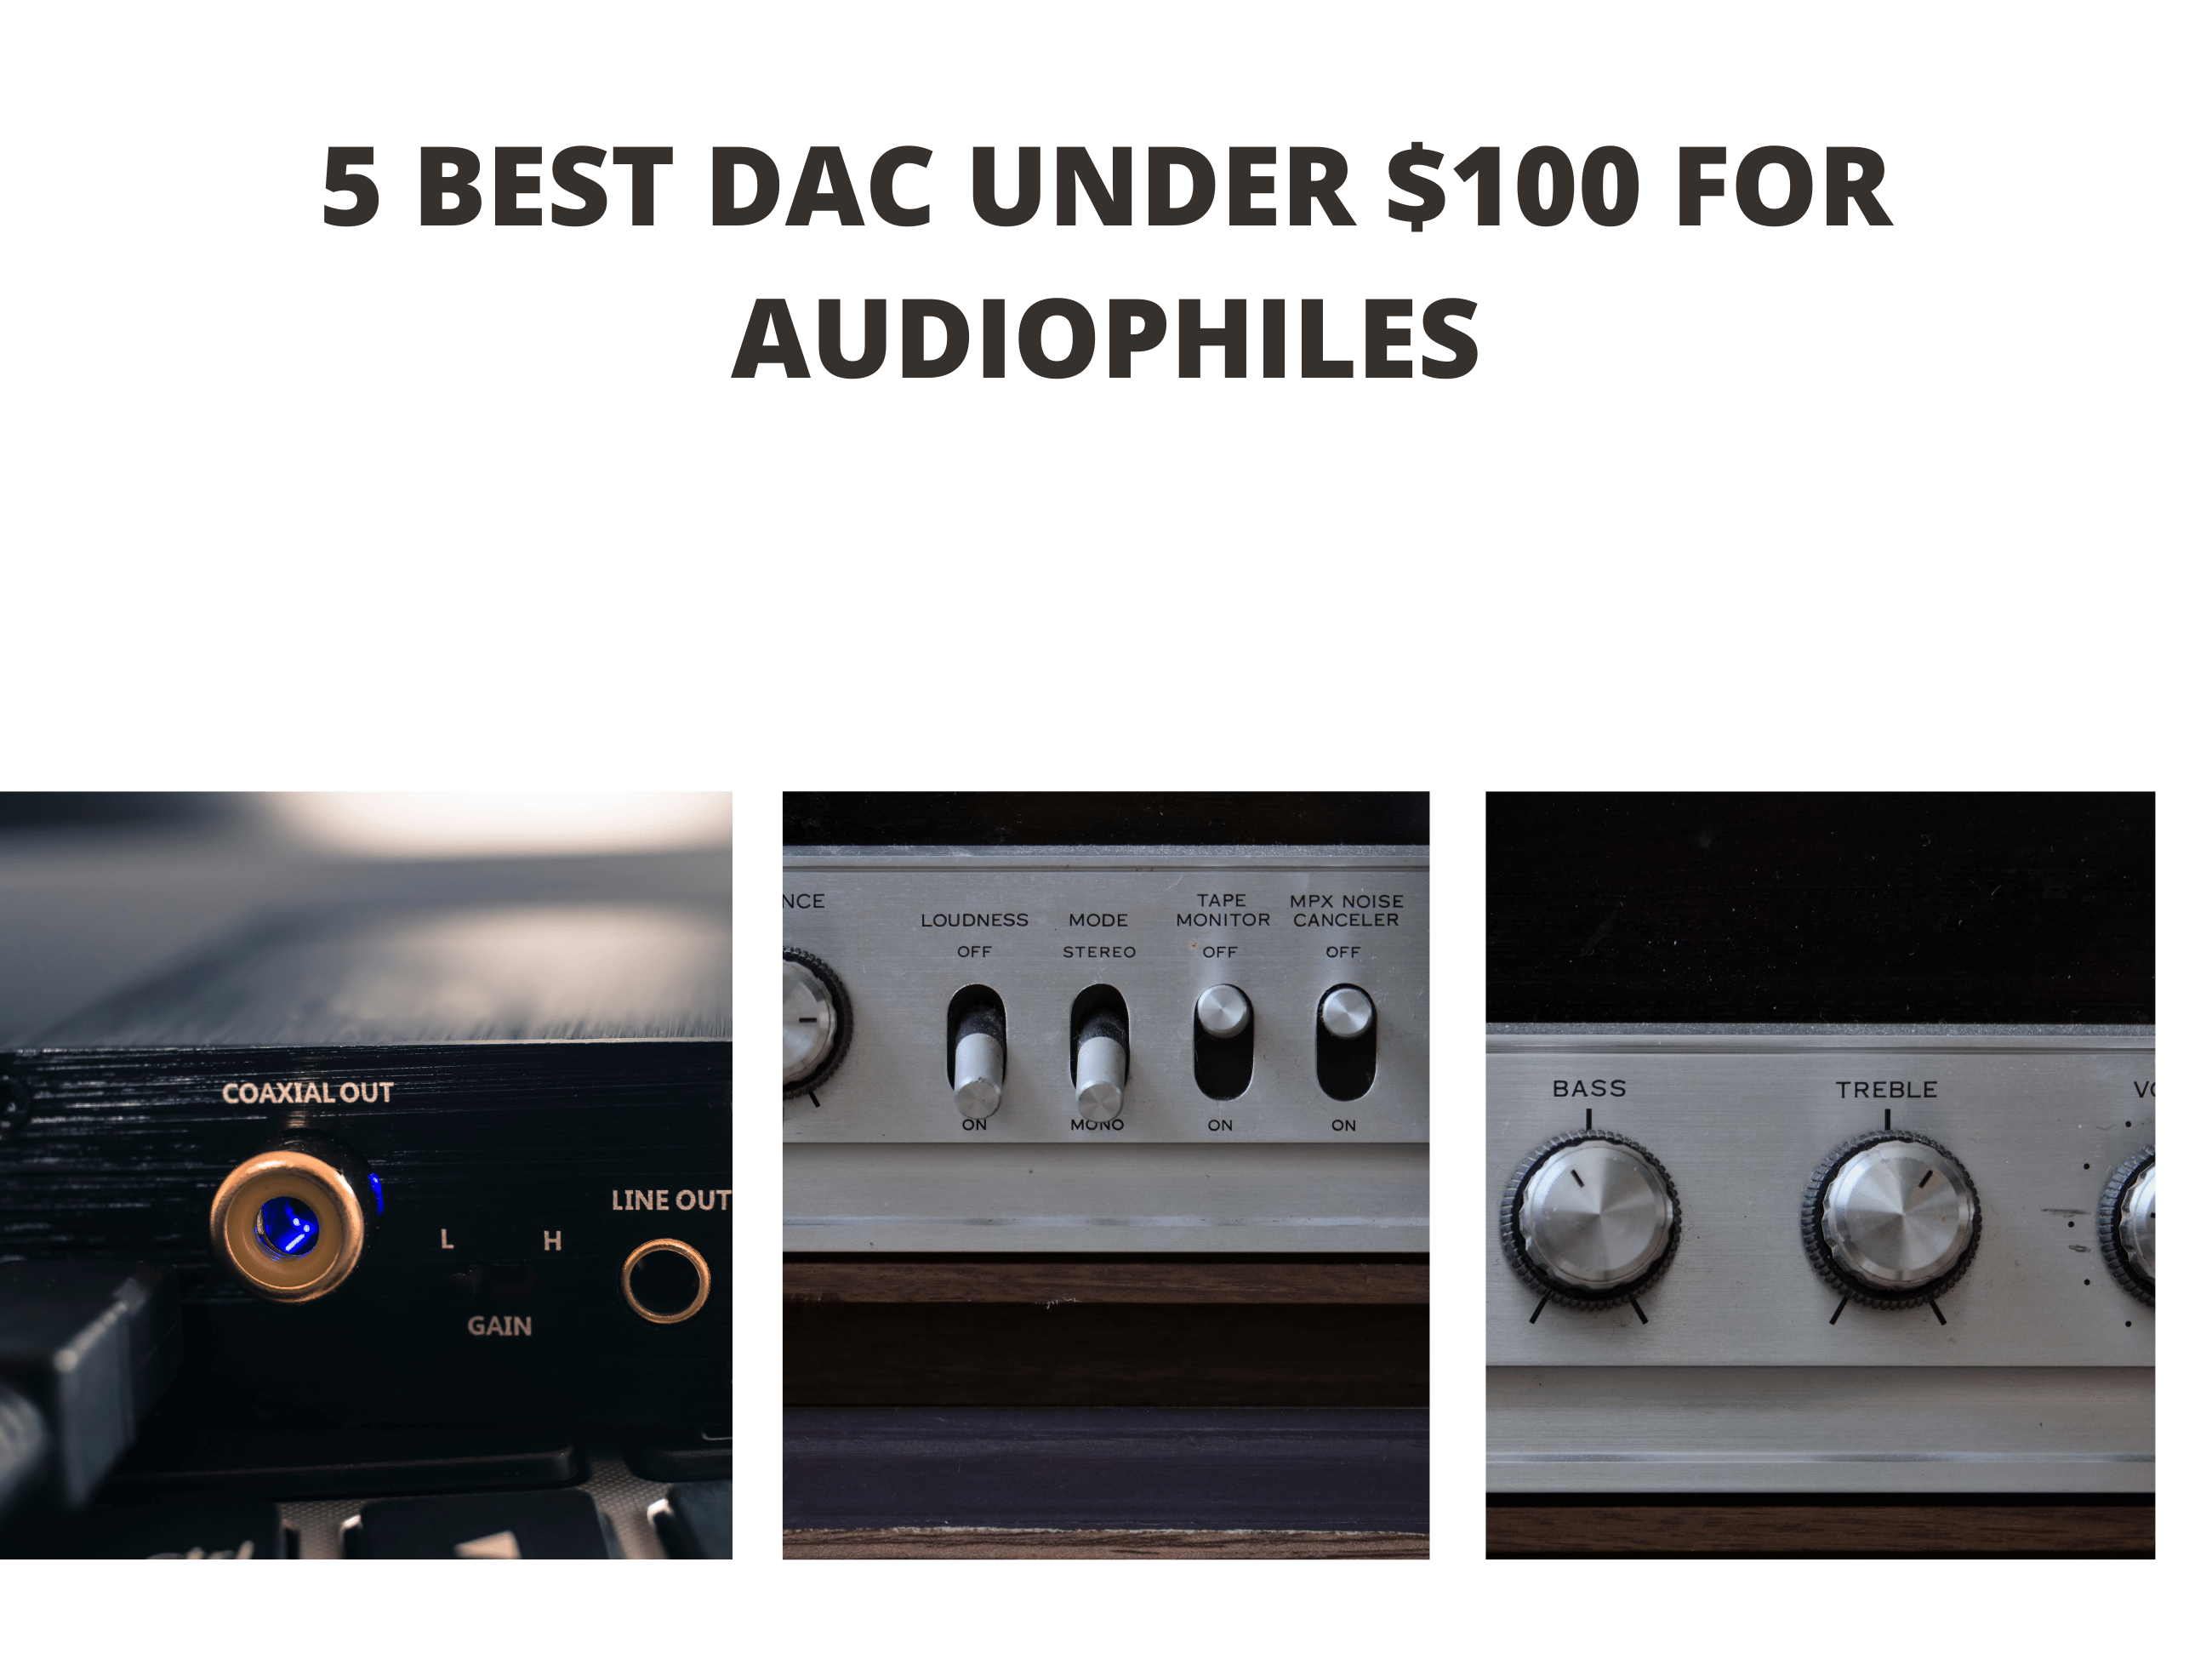 5 Best DAC under $100 for Audiophiles (2021 Reviews)